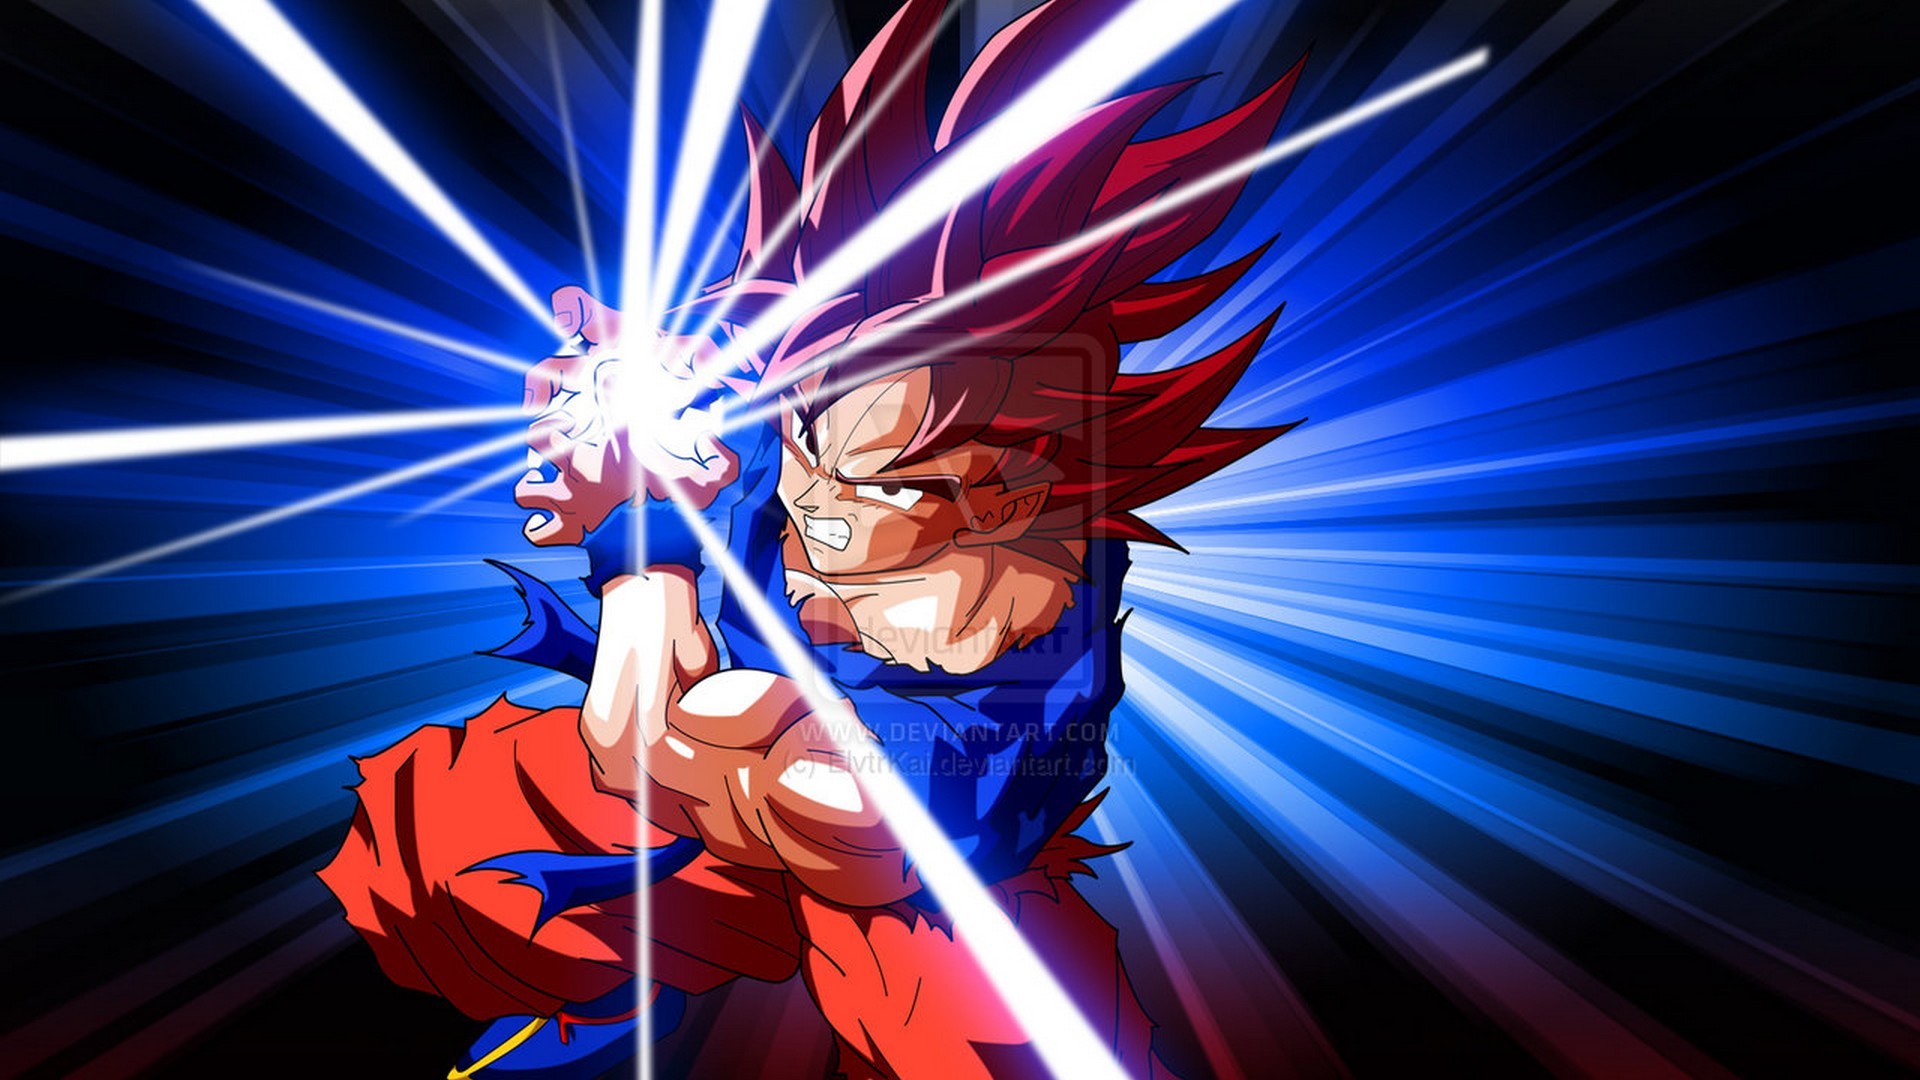 Wallpaper Goku Super Saiyan God Desktop with image resolution 1920x1080 pixel. You can use this wallpaper as background for your desktop Computer Screensavers, Android or iPhone smartphones